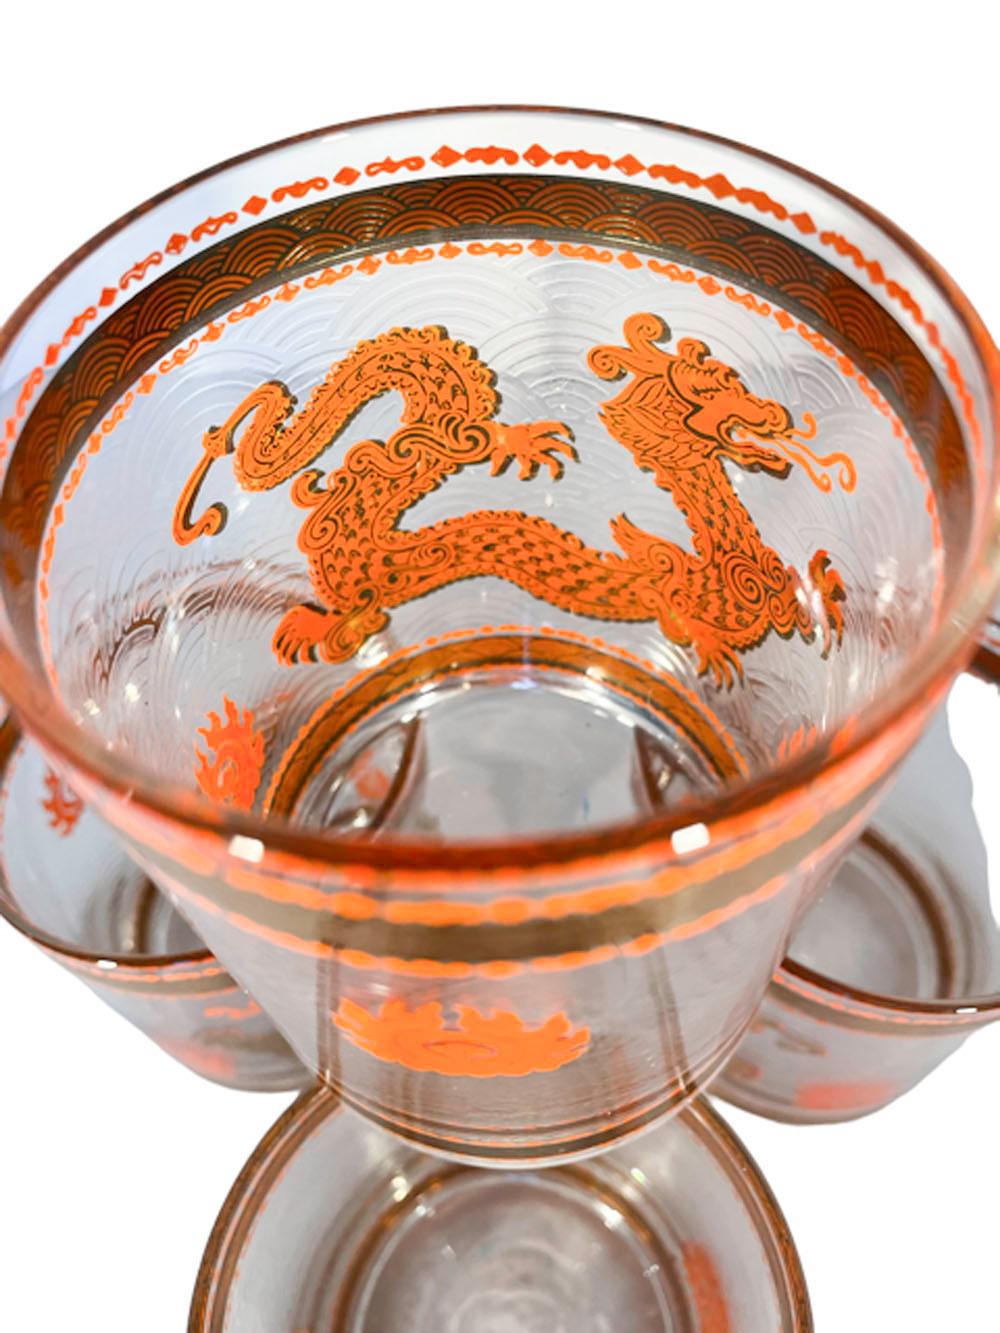 Vintage rocks glasses by Cera Glassware in the hard-to-find Golden Dragon pattern - decorated in 22k gold and orange enamel with a large dragon pursuing the flaming pearl of wisdom against a ground of translucent stylized clouds.
 